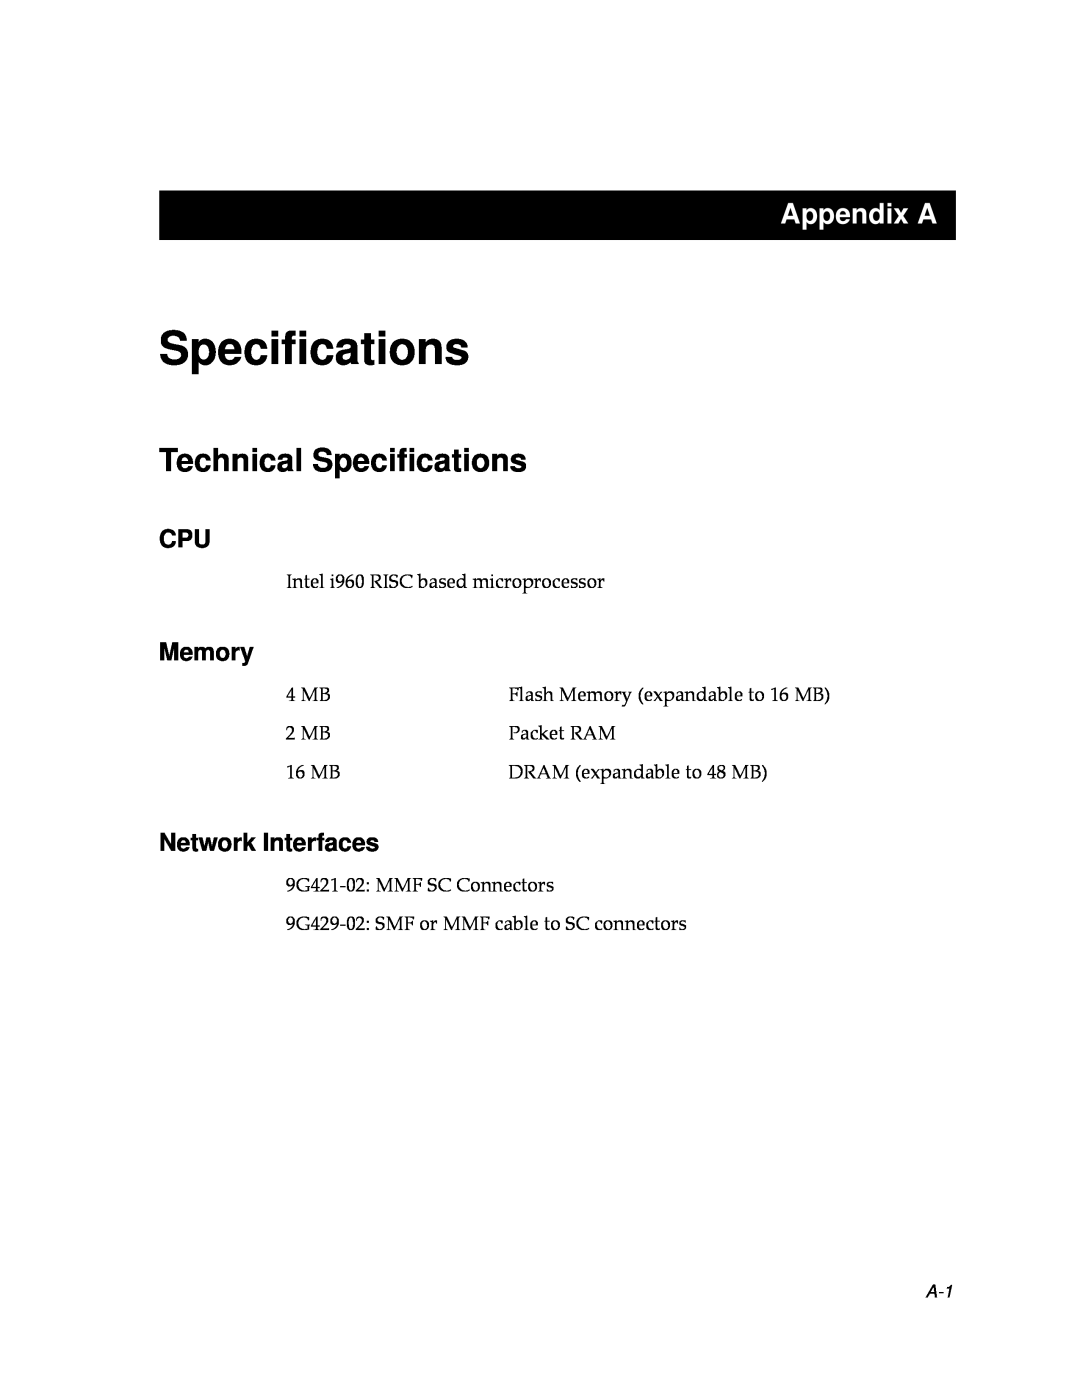 Cabletron Systems 9000 manual Technical Speciﬁcations, Appendix A, Memory, Network Interfaces 